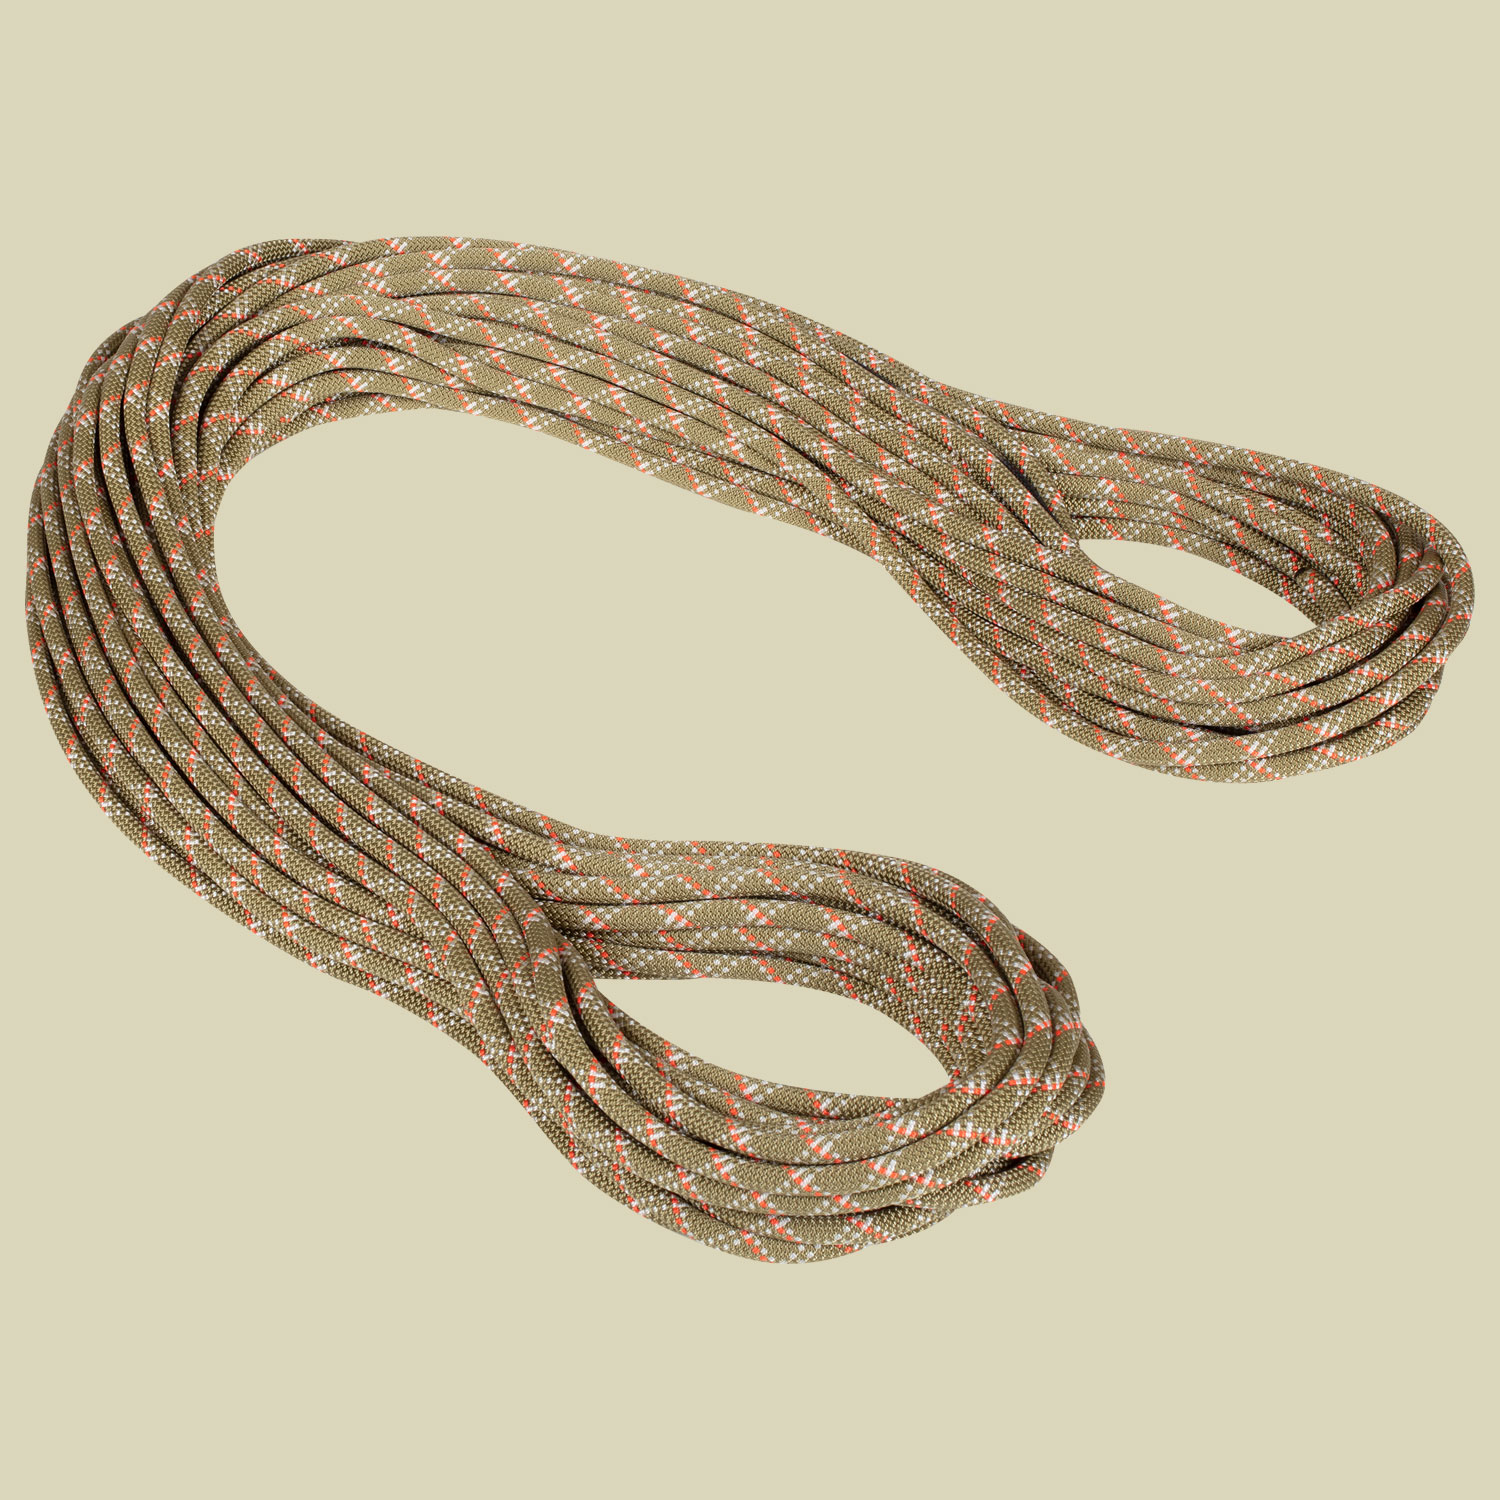 9.5 Gym Classic Rope